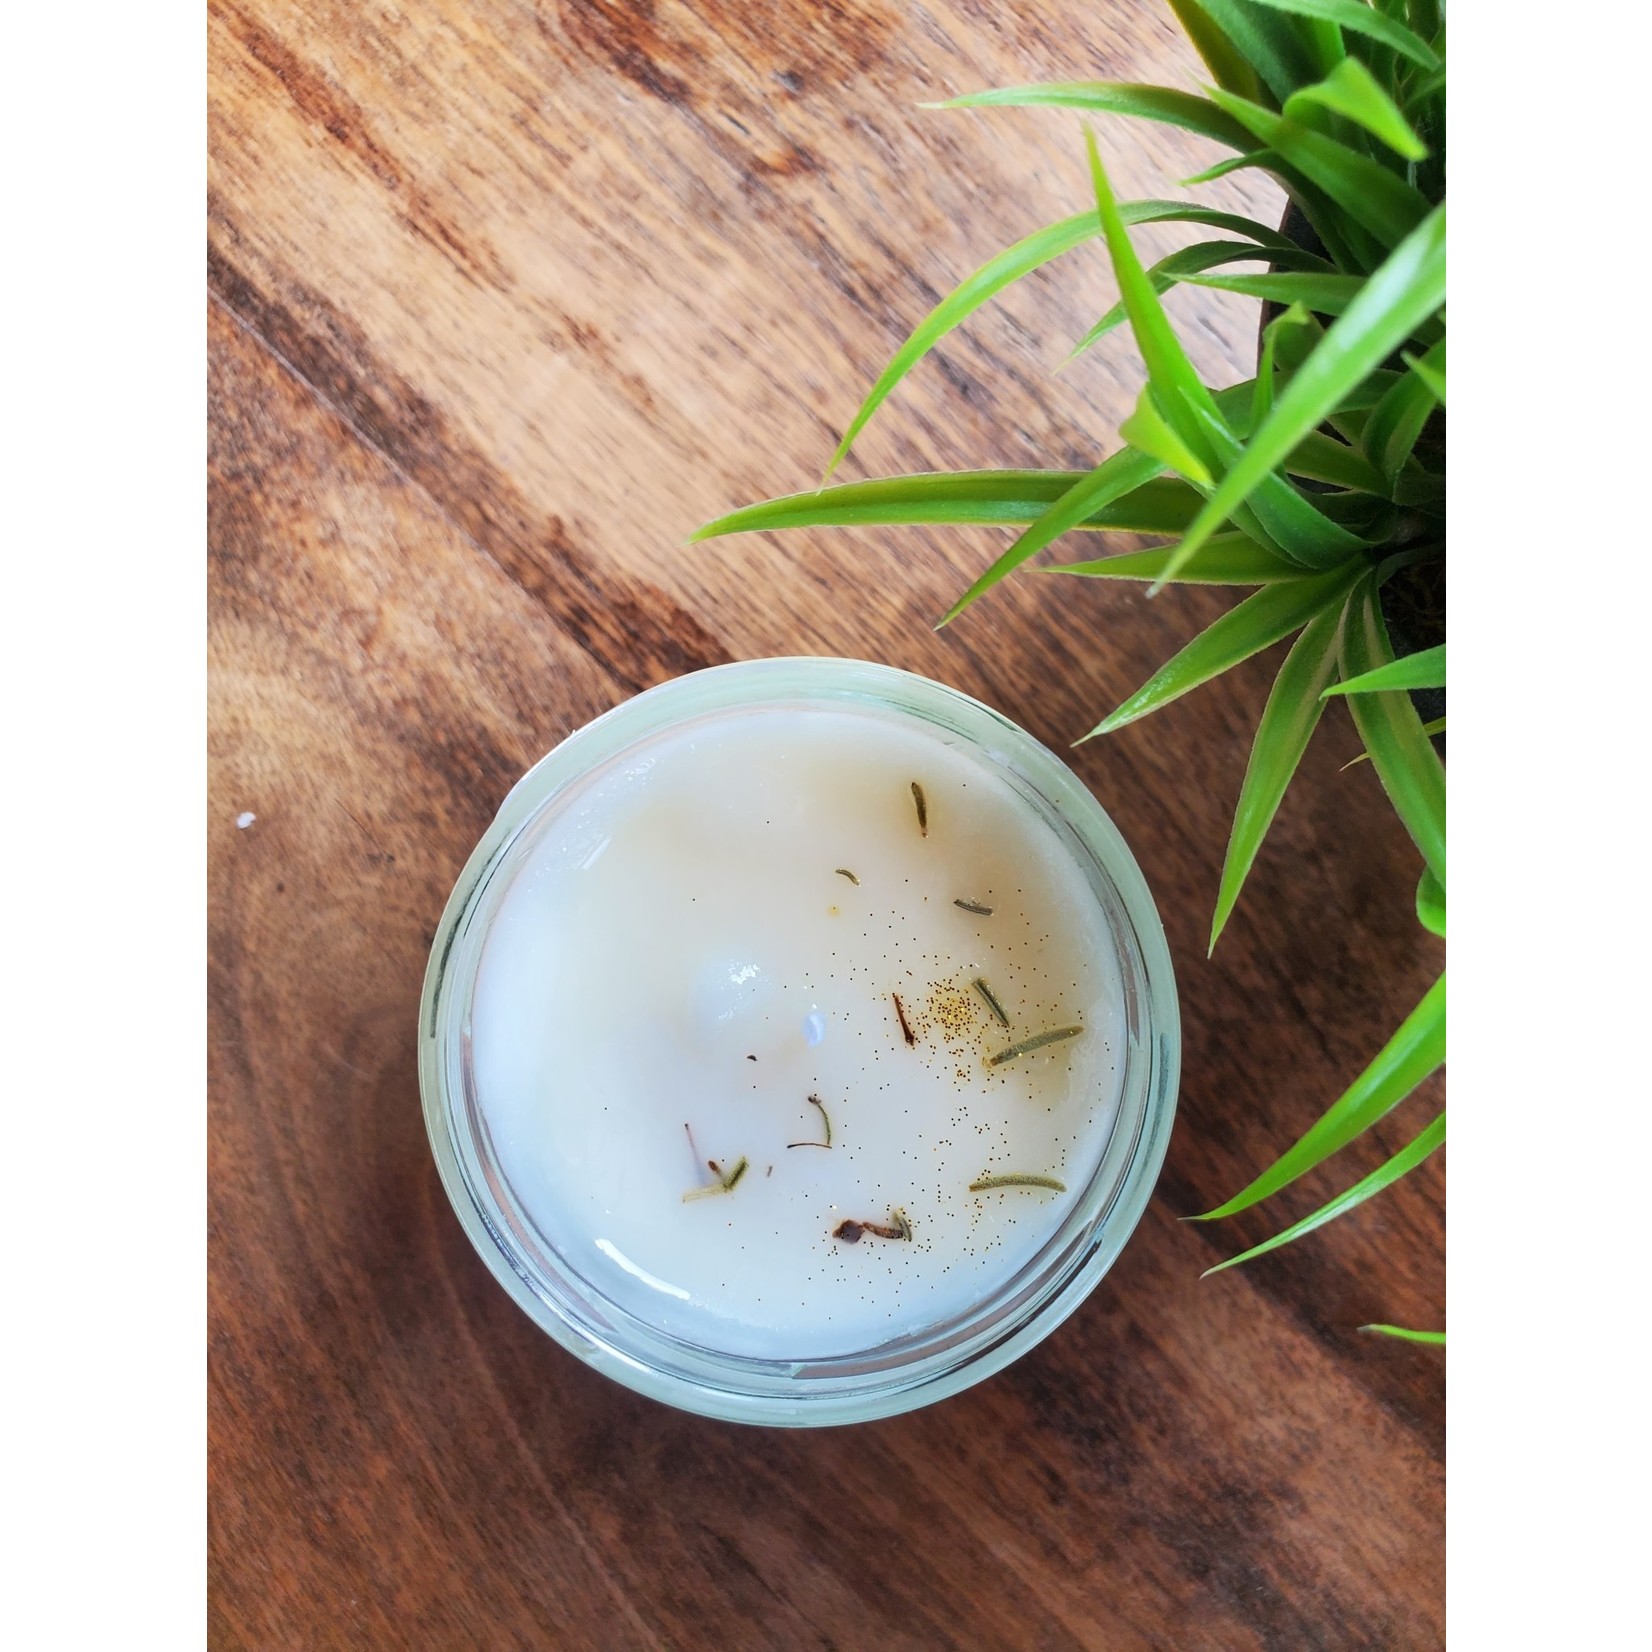 BARELY THERE SKINCARE BARELY THERE LEMONGRASS VERBENA CANDLE